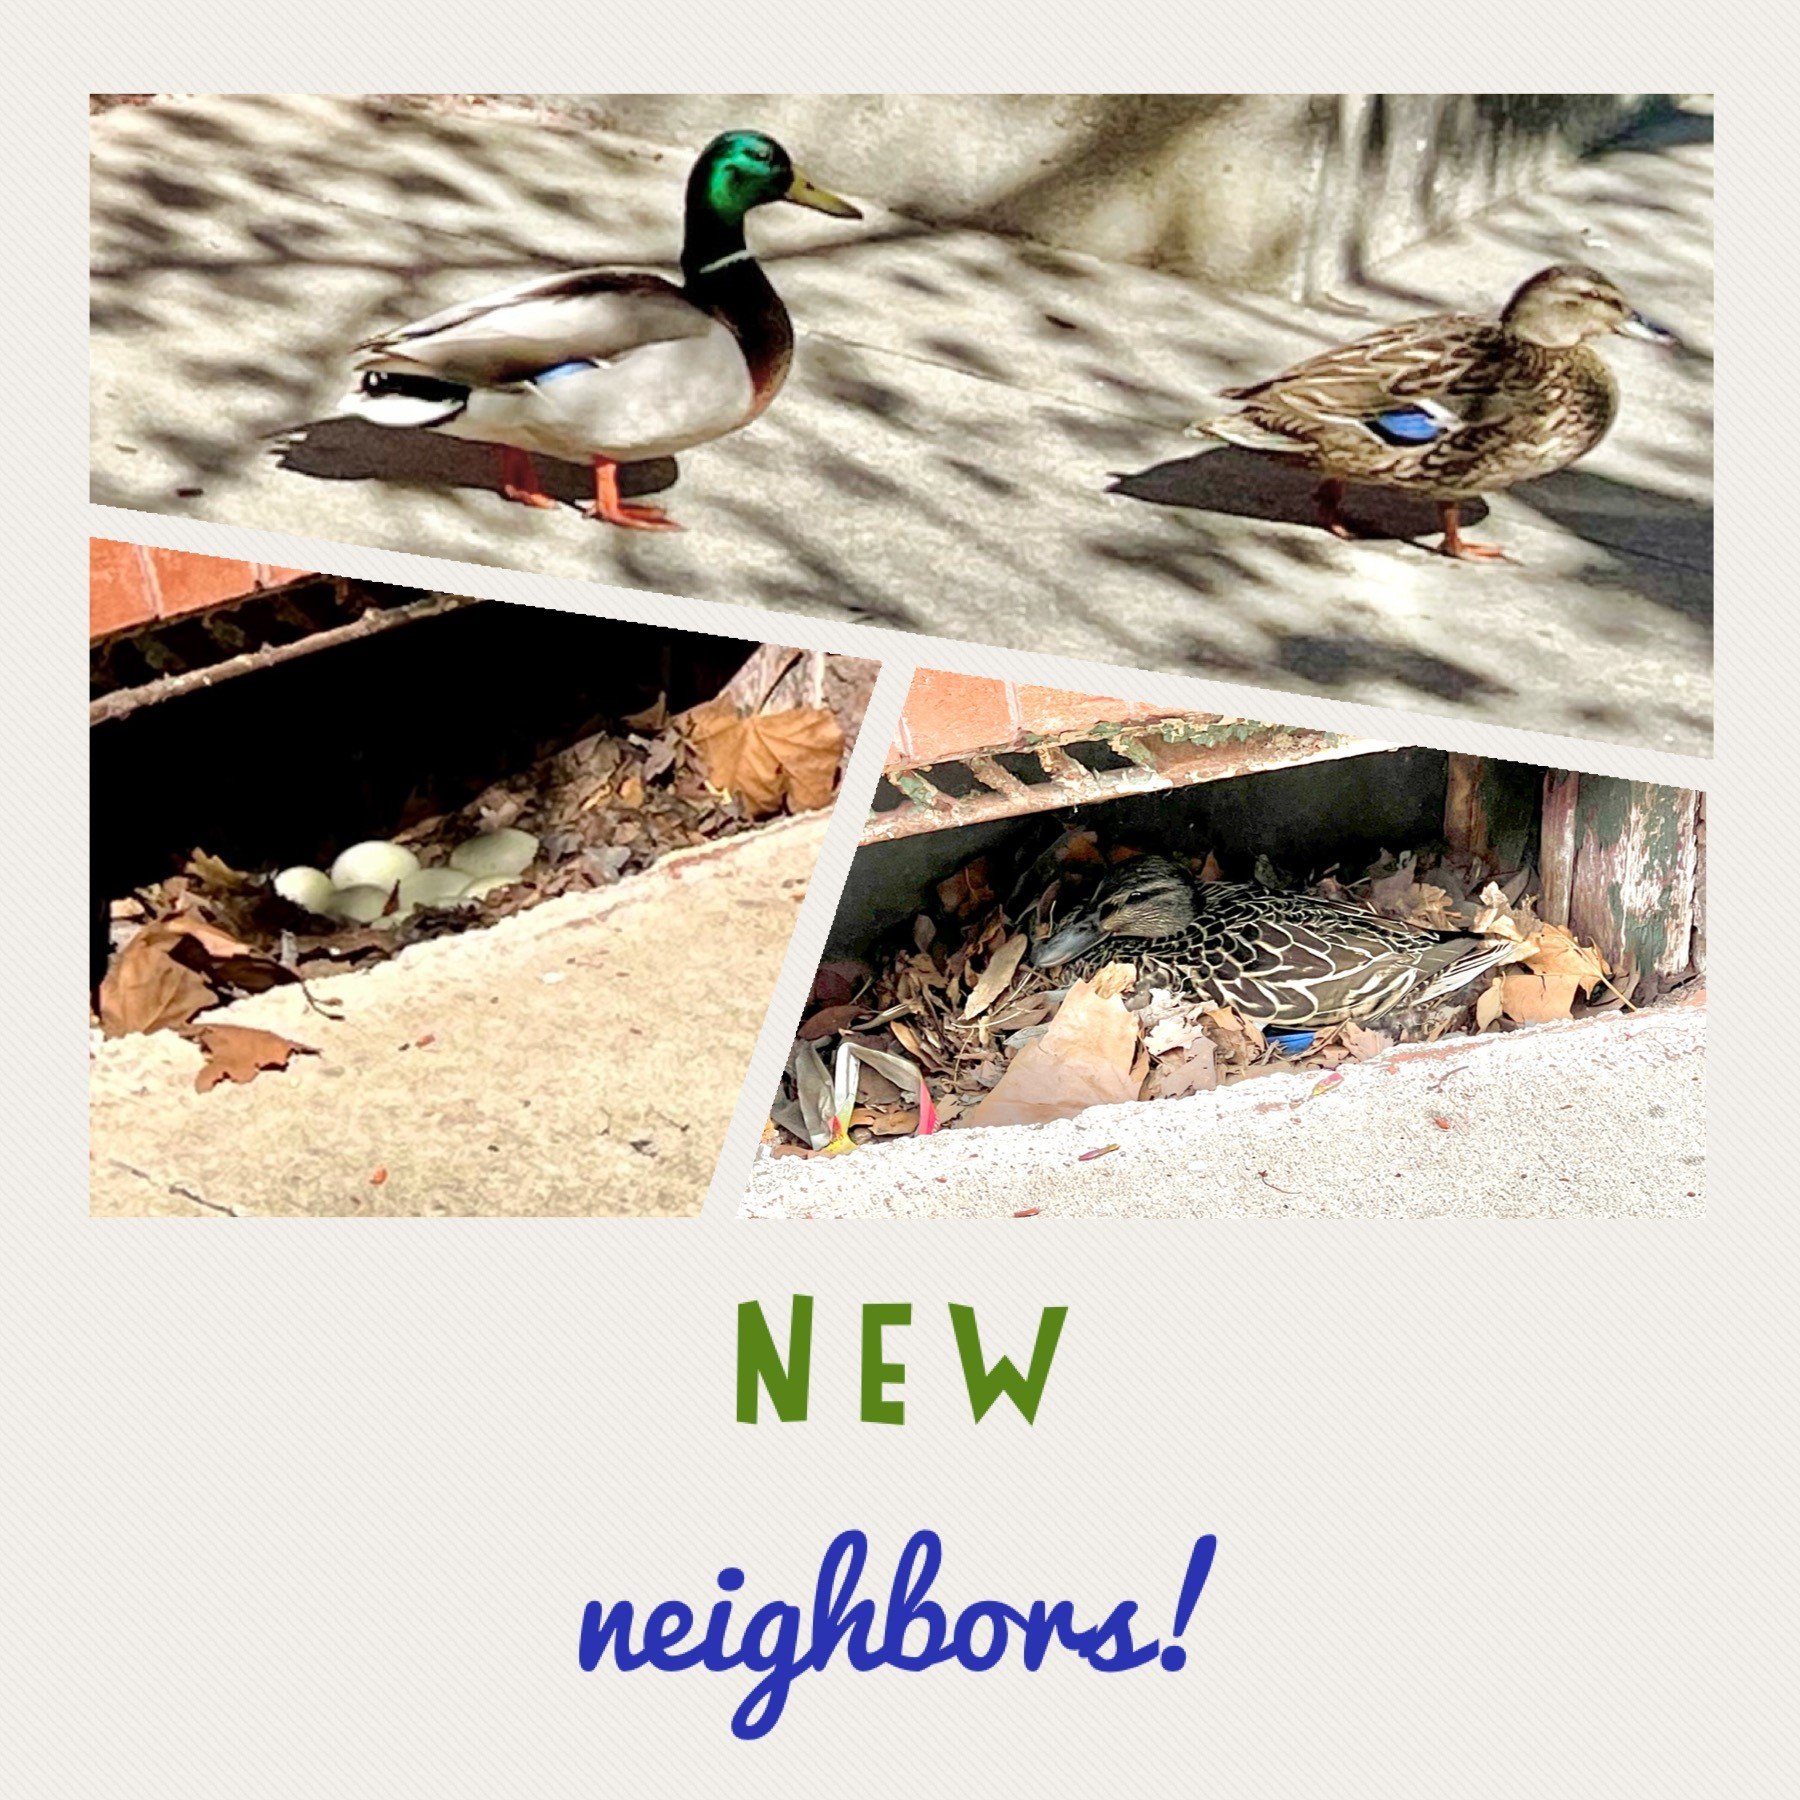 🐣✨ Egg-citing news! We have some adorable new neighbors &ndash; a family of ducks that laid eggs in the window well next door! 

We're contemplating names for our feathered friends and would love your suggestions! Drop your best duck names in the co